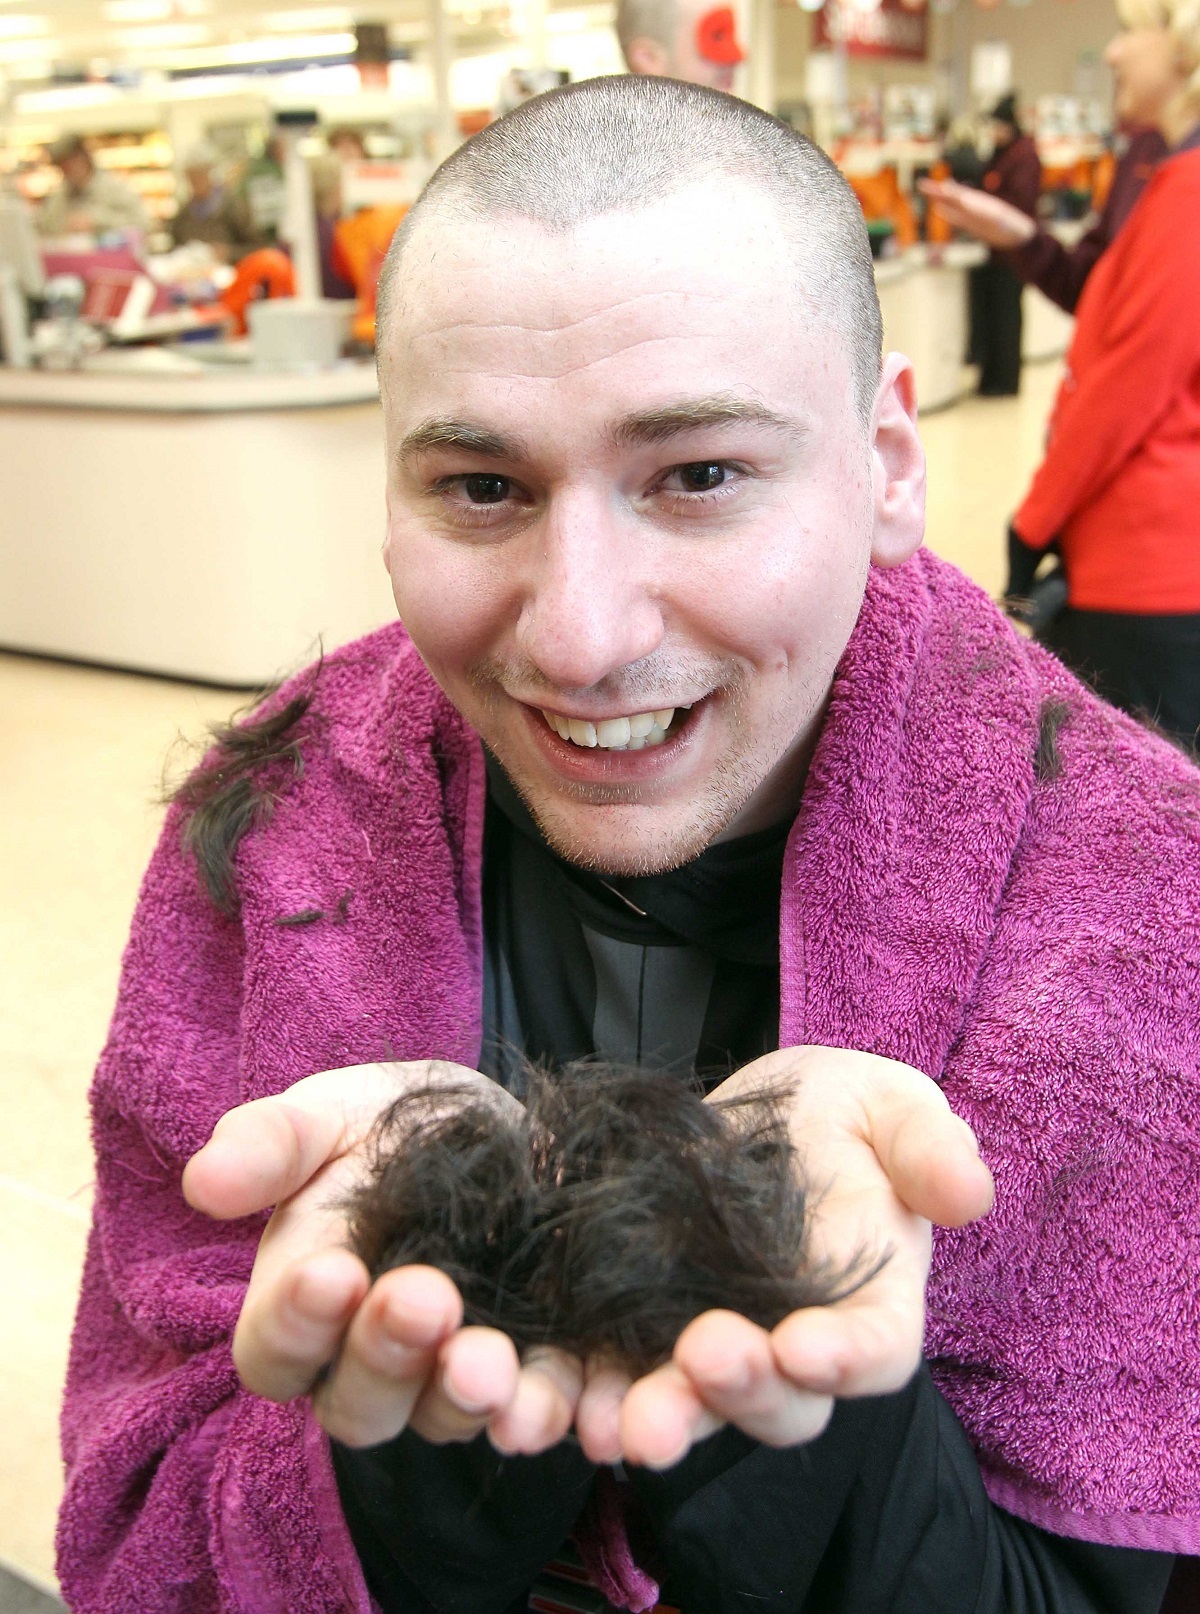 Enough head - Danielle Nash shaved Scott Bowes and Paul Roche at Sainsburys in Halstead in 2013